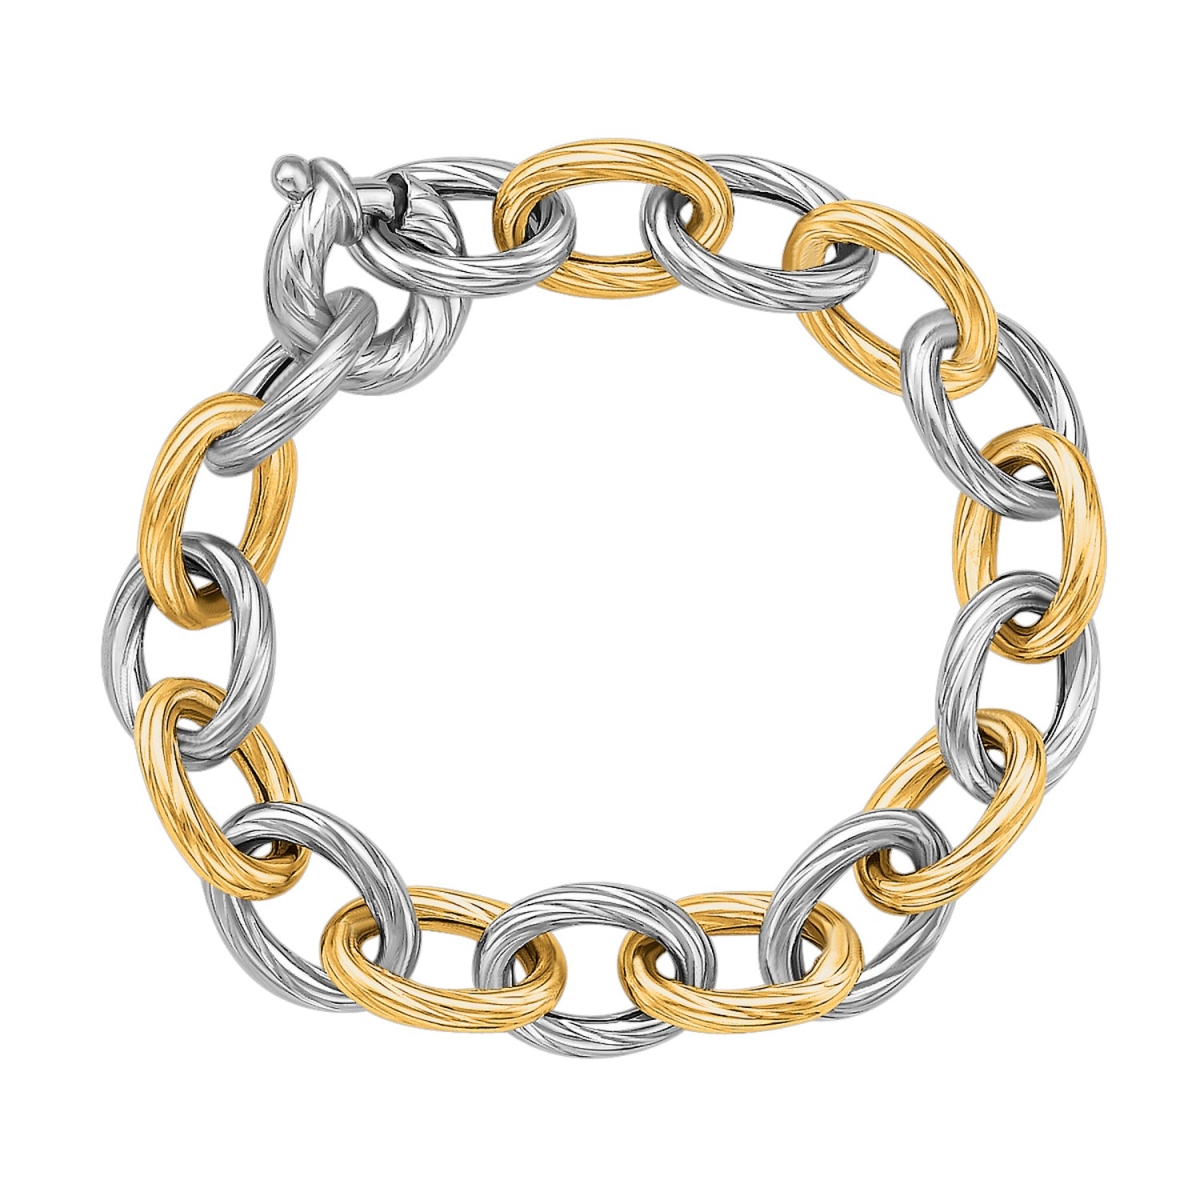 D136006-7.75 18k Yellow Gold & Sterling Silver Rhodium Plated Diamond Cut Chain Bracelet - Size 7.75 In.